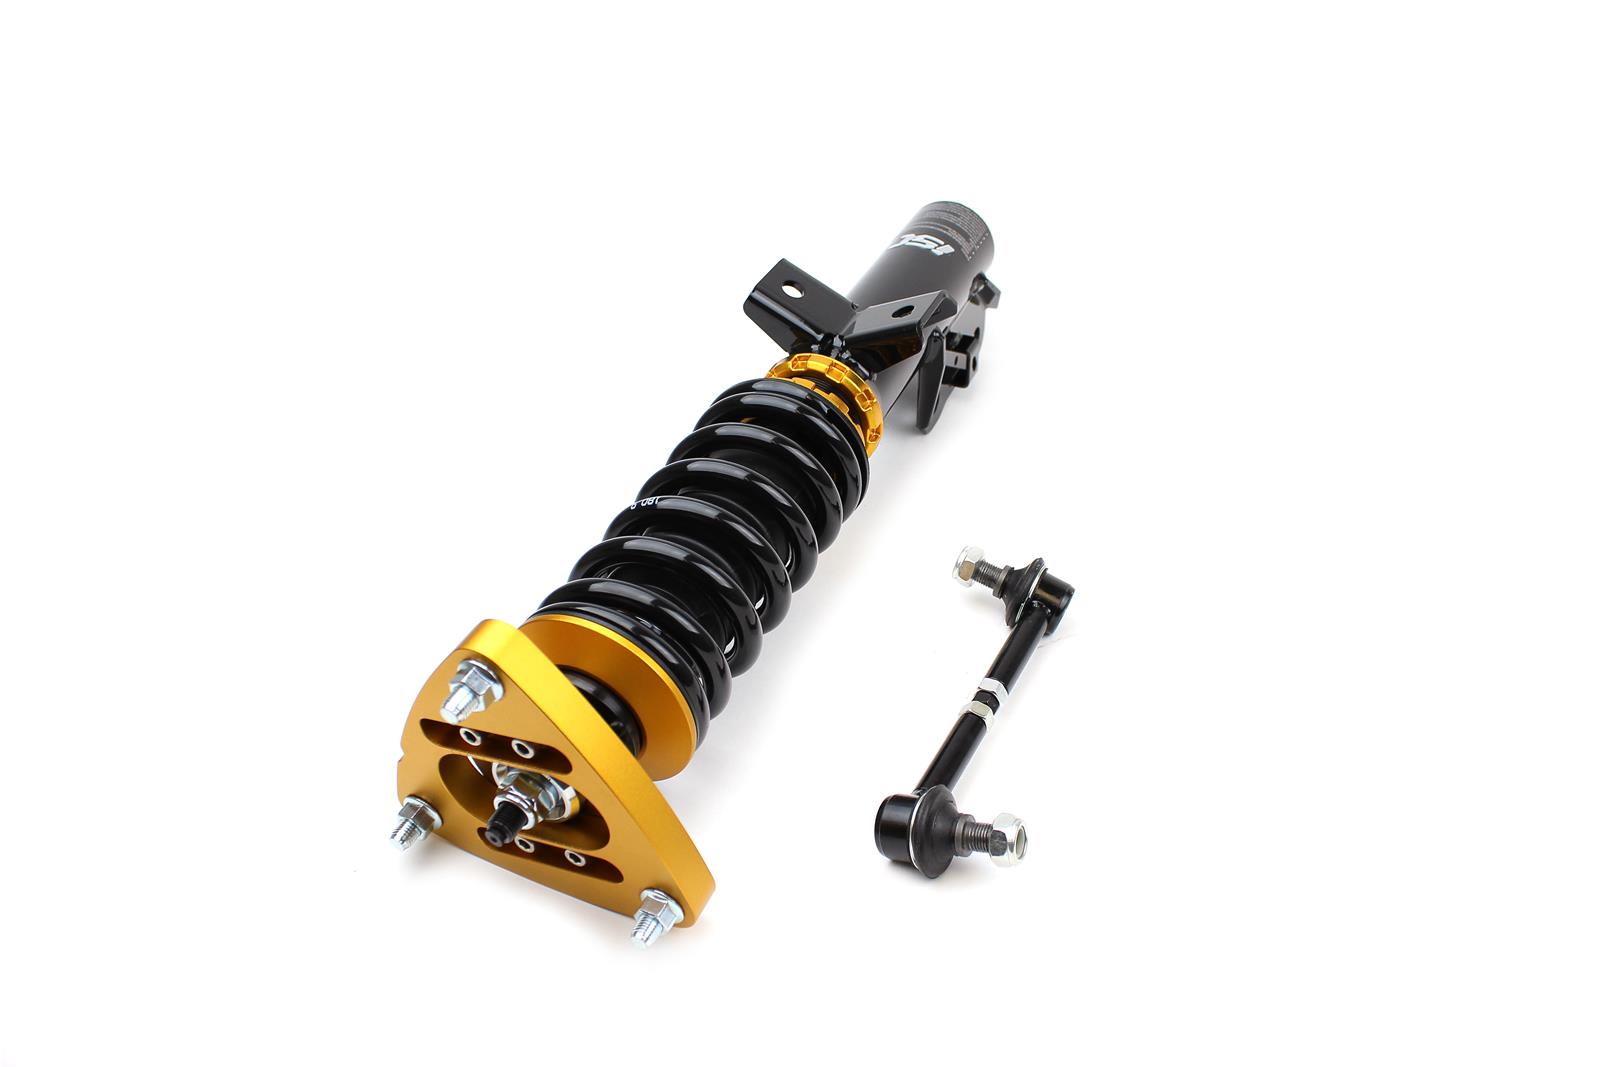 ISC Suspension 2015+ Ford Mustang N1 Coilovers - Street